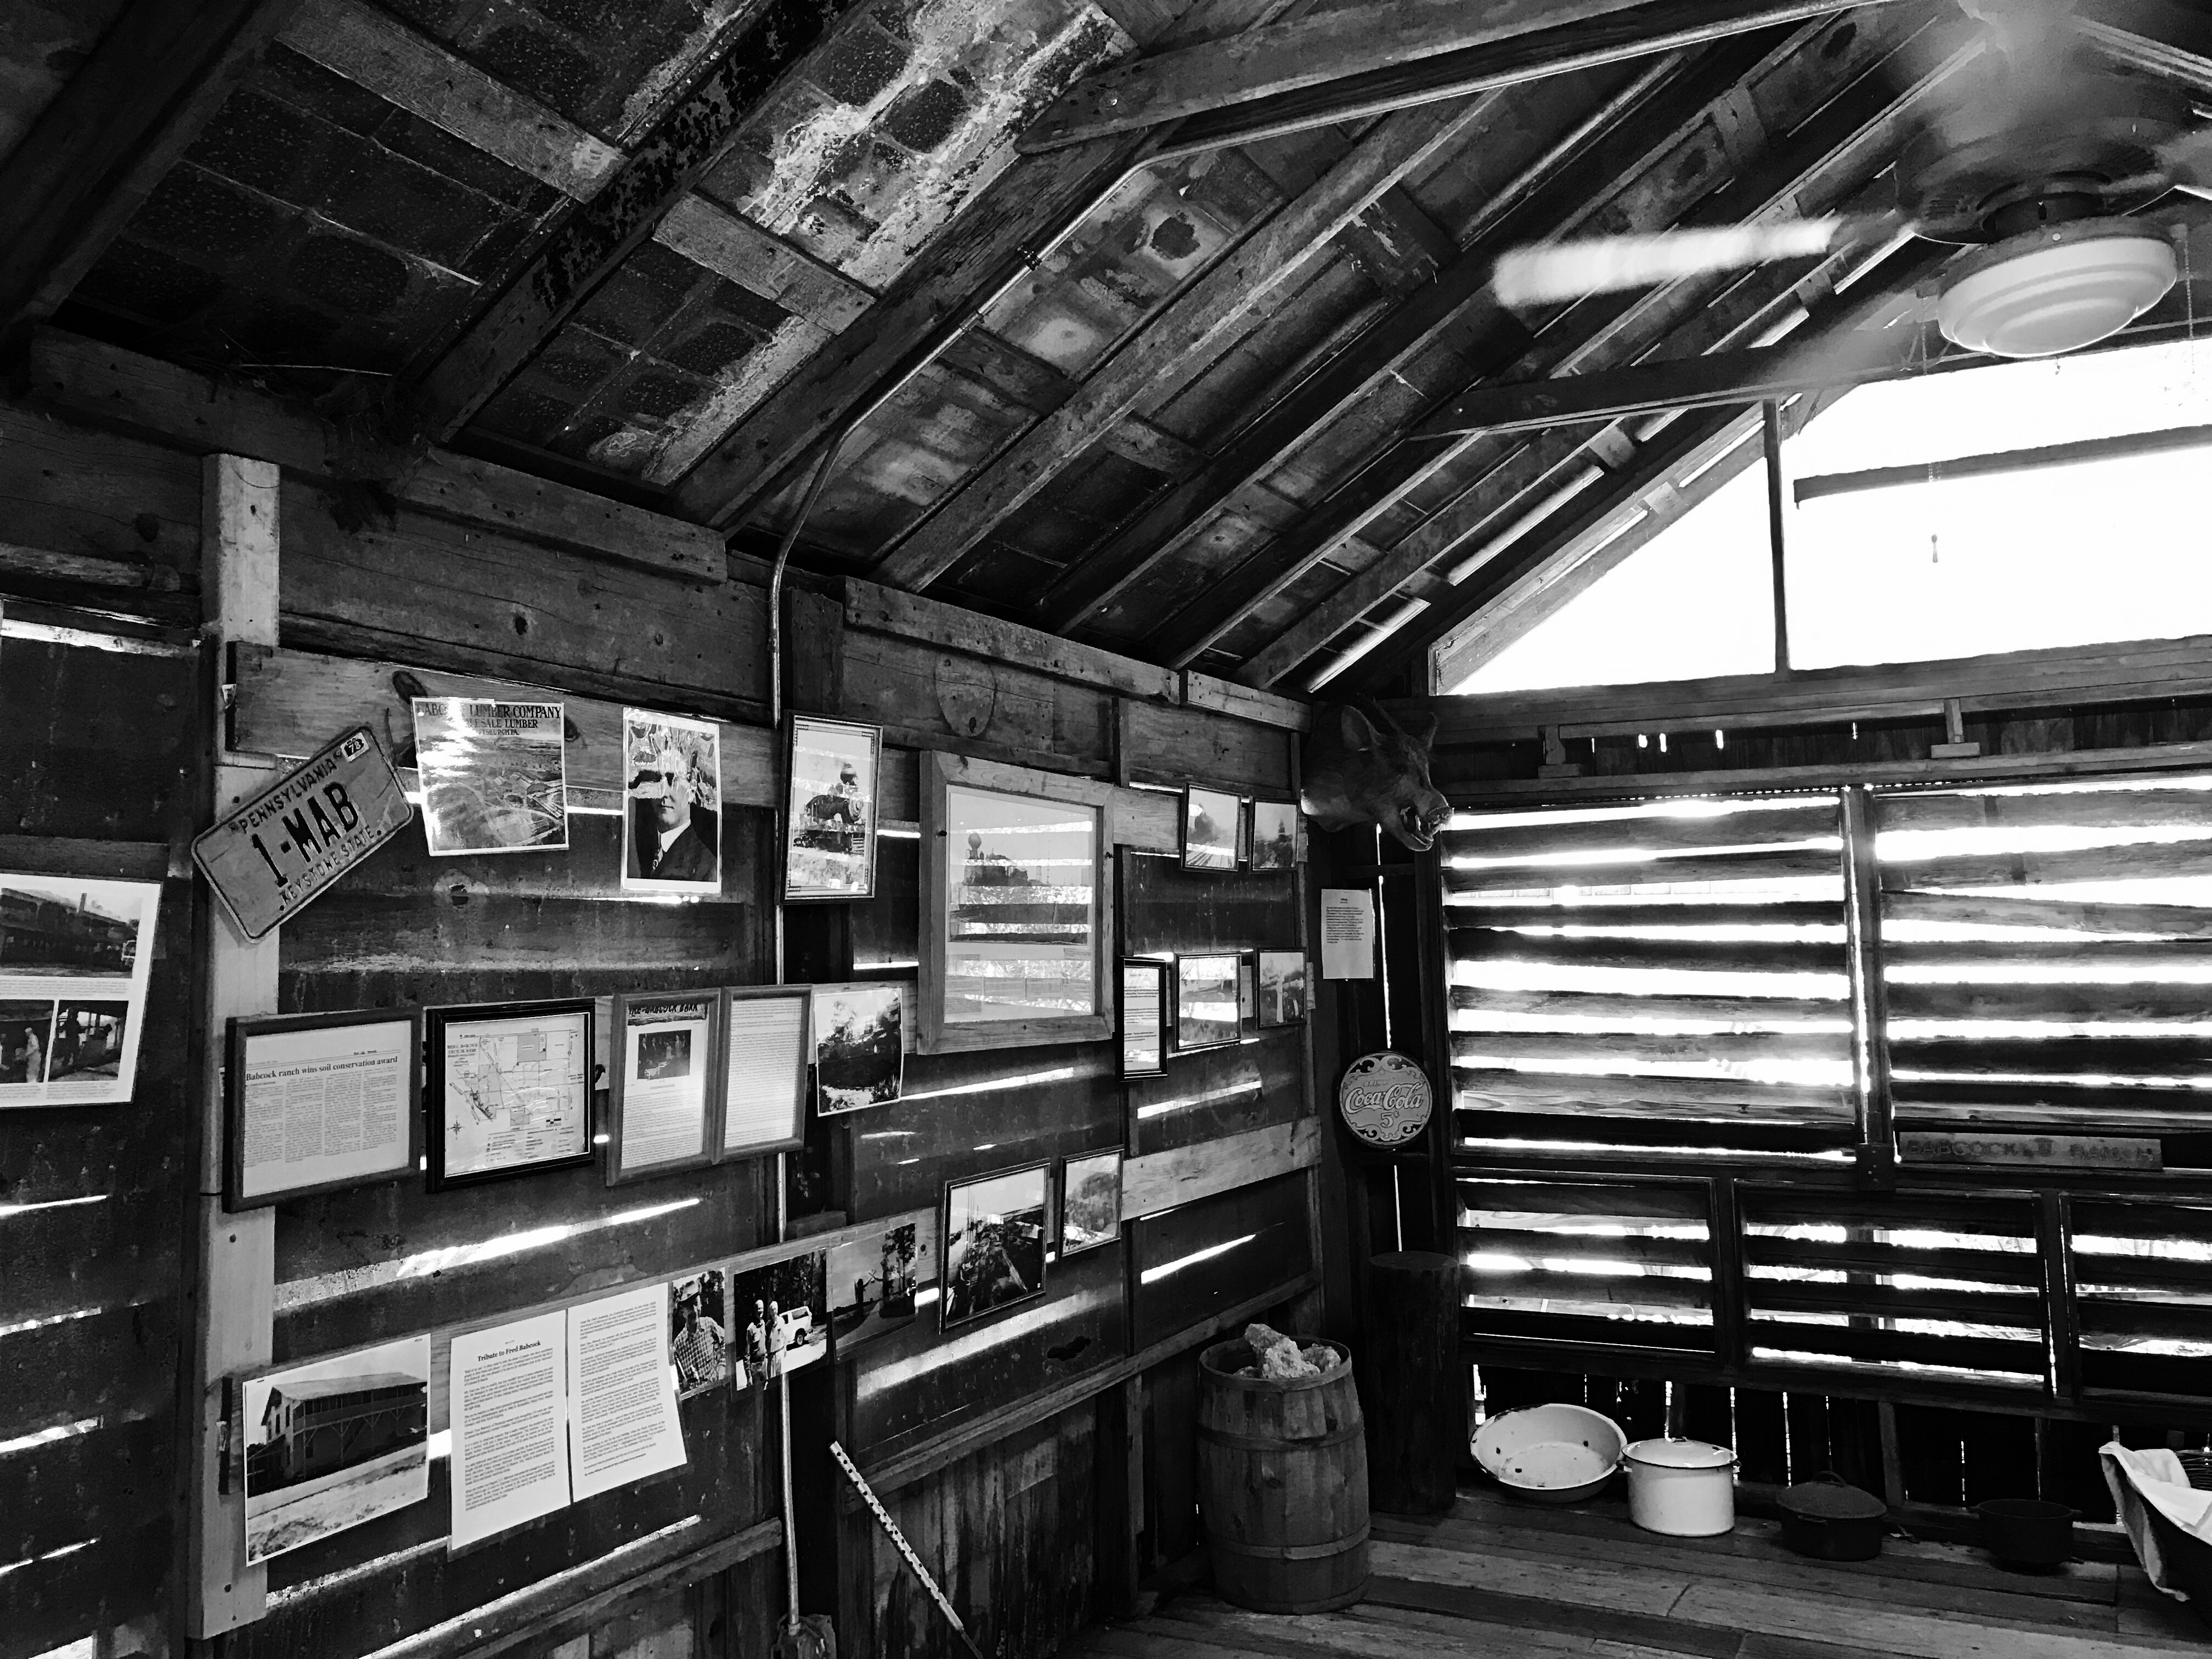 an exhibit of pictures and papers with history facts about Babcock Ranch